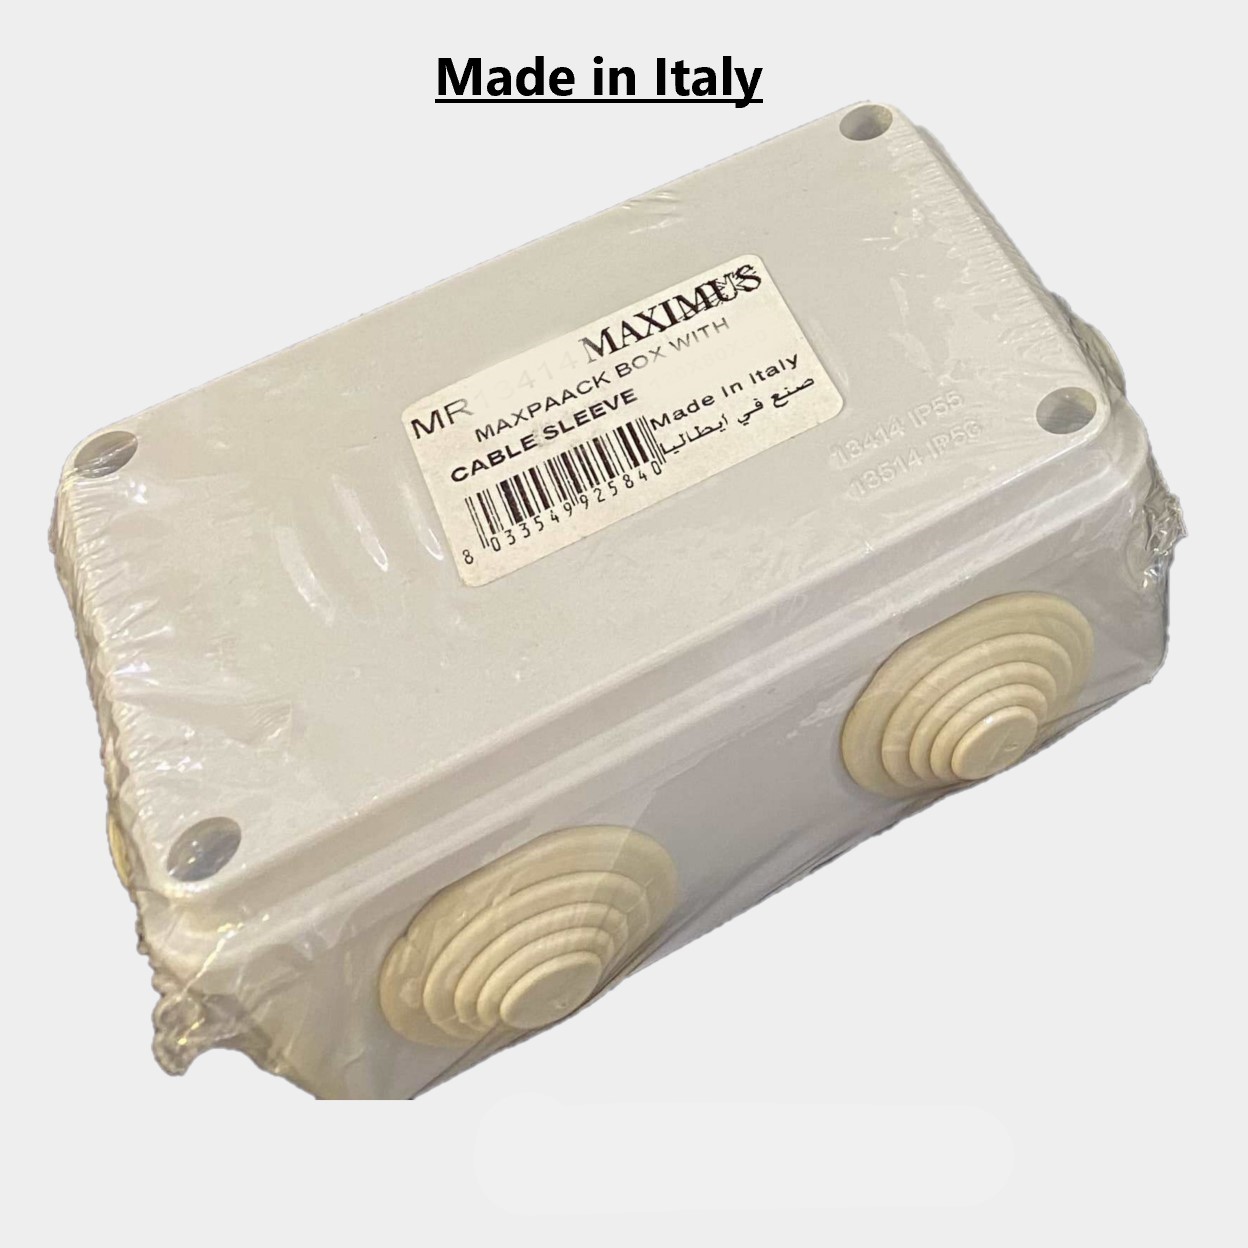 Maximus MAAXPACK Junction Box (MRRS13405) - Surface Mounting Junction box - Size 150 x 110 x 70 mm - IP55